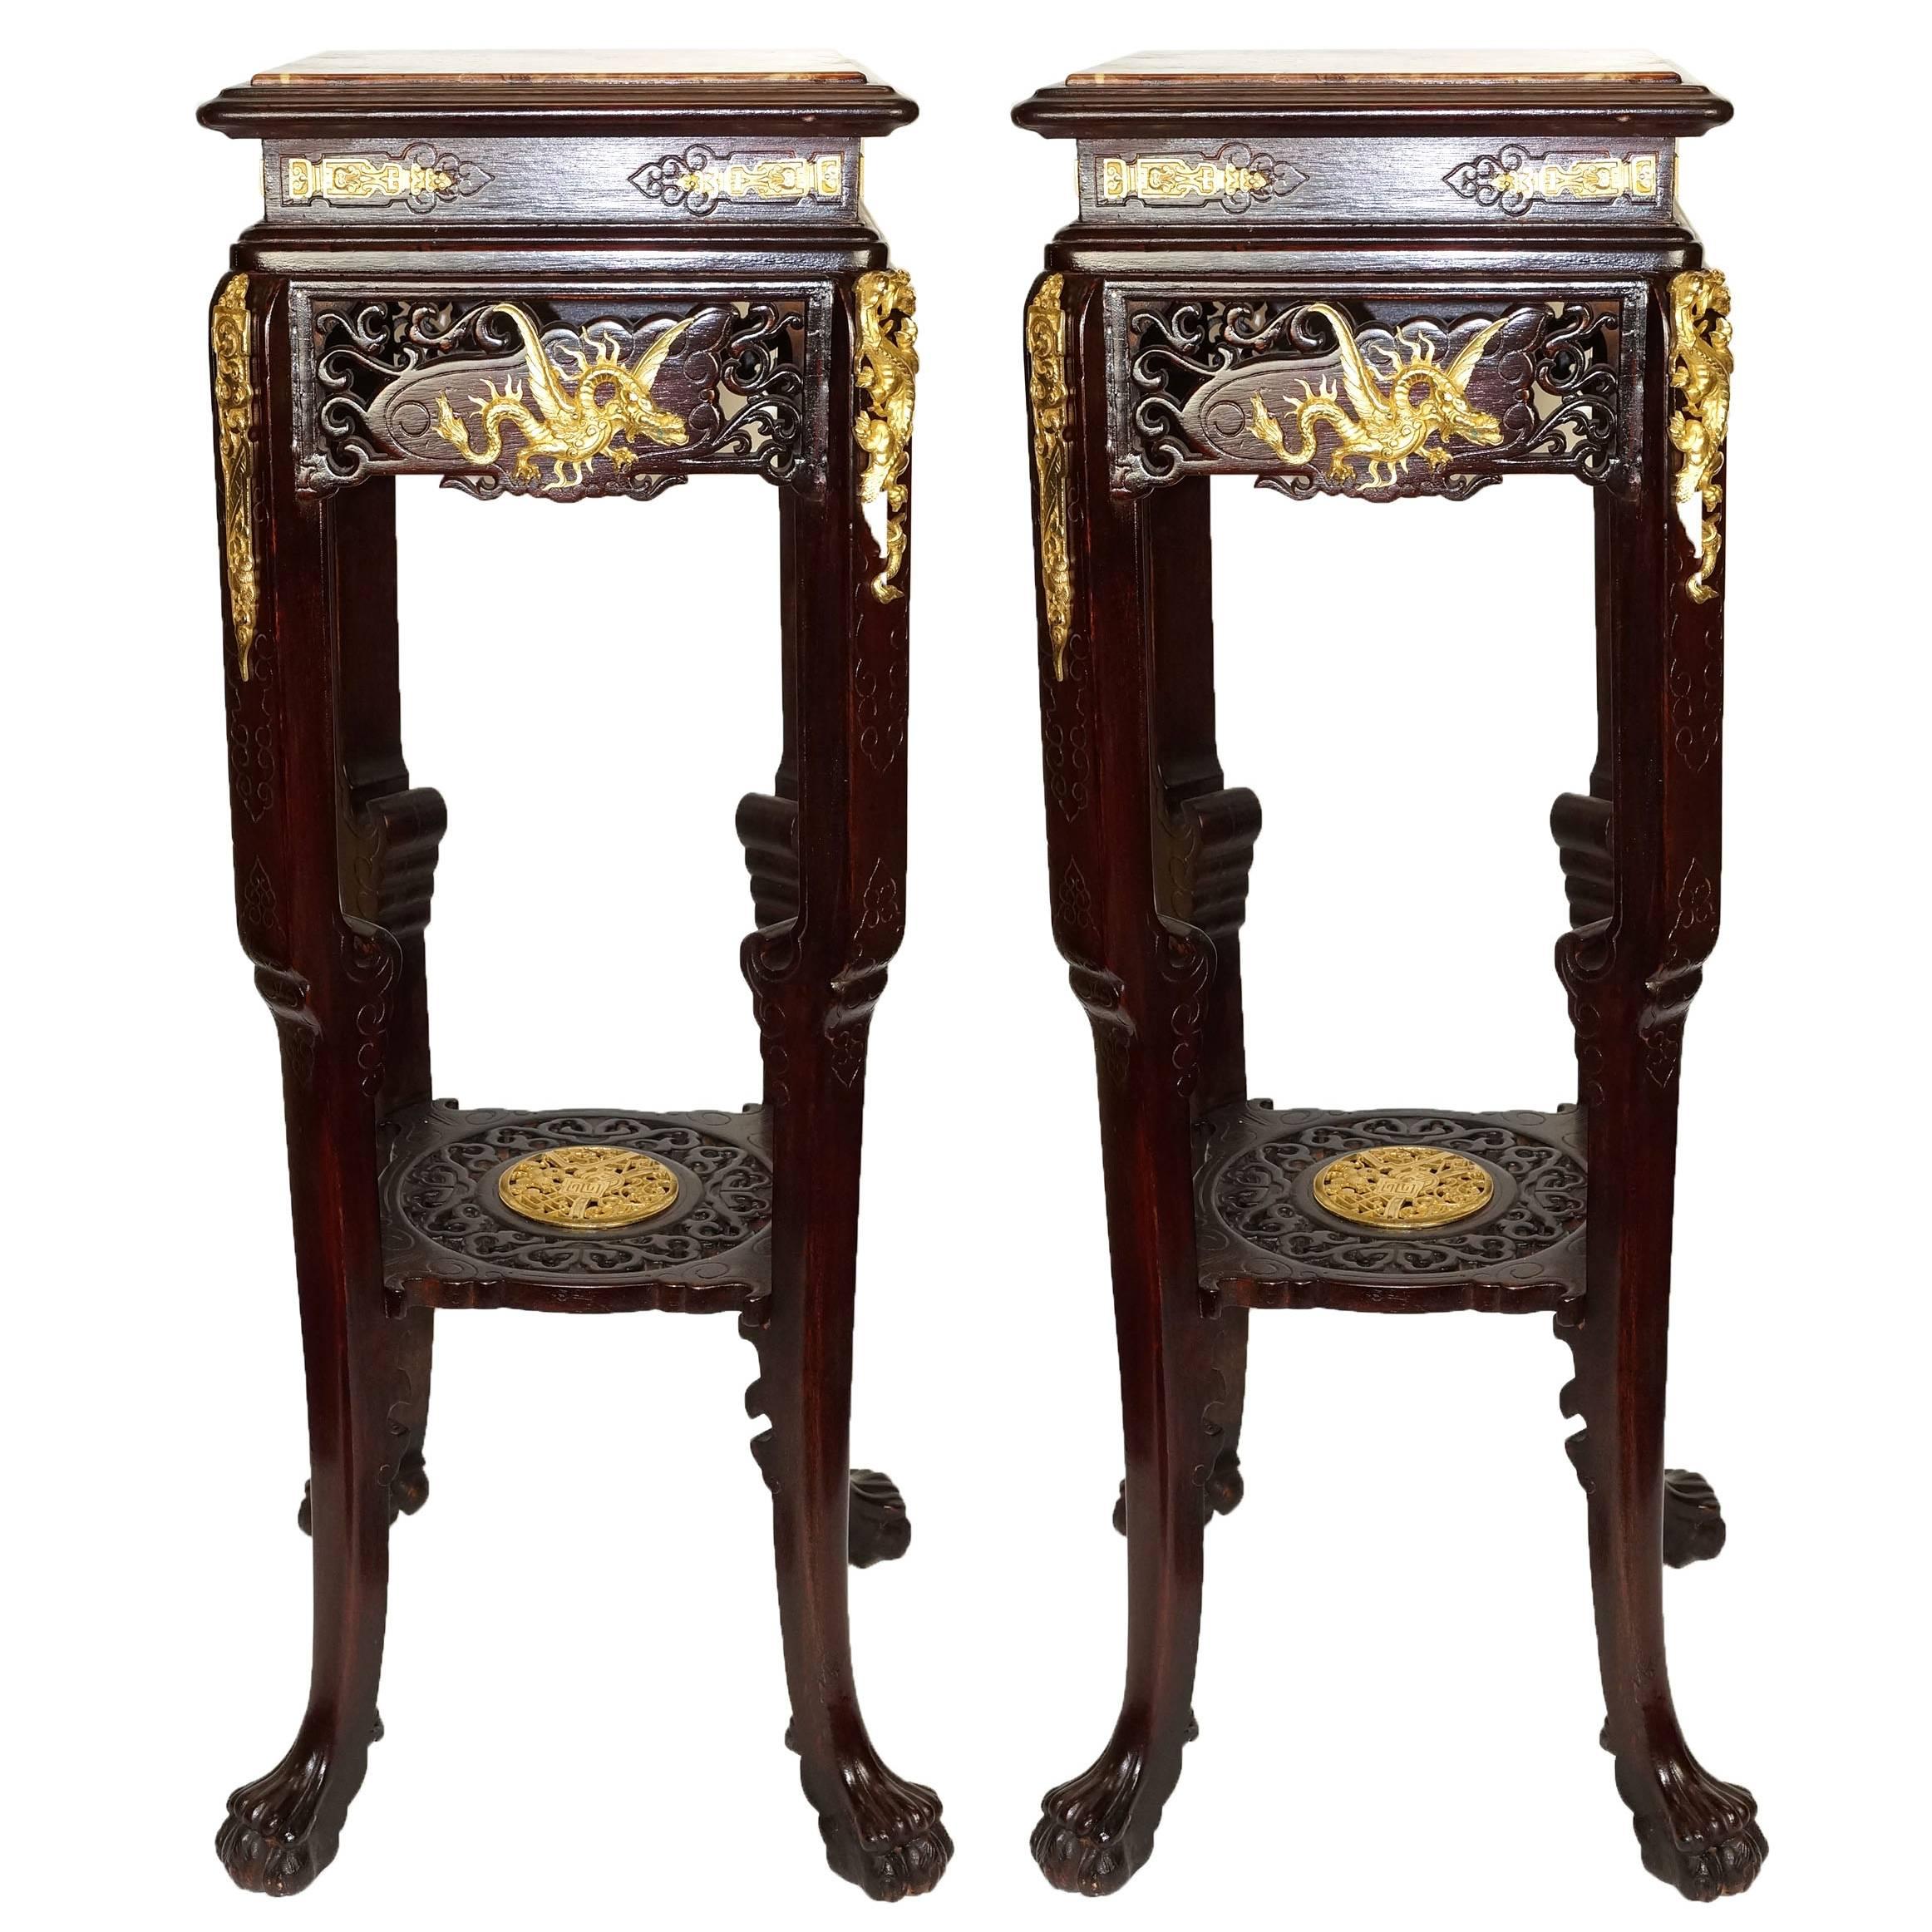 Pair of Japanned Marble-Top Square Pedestals for the Oriental Market